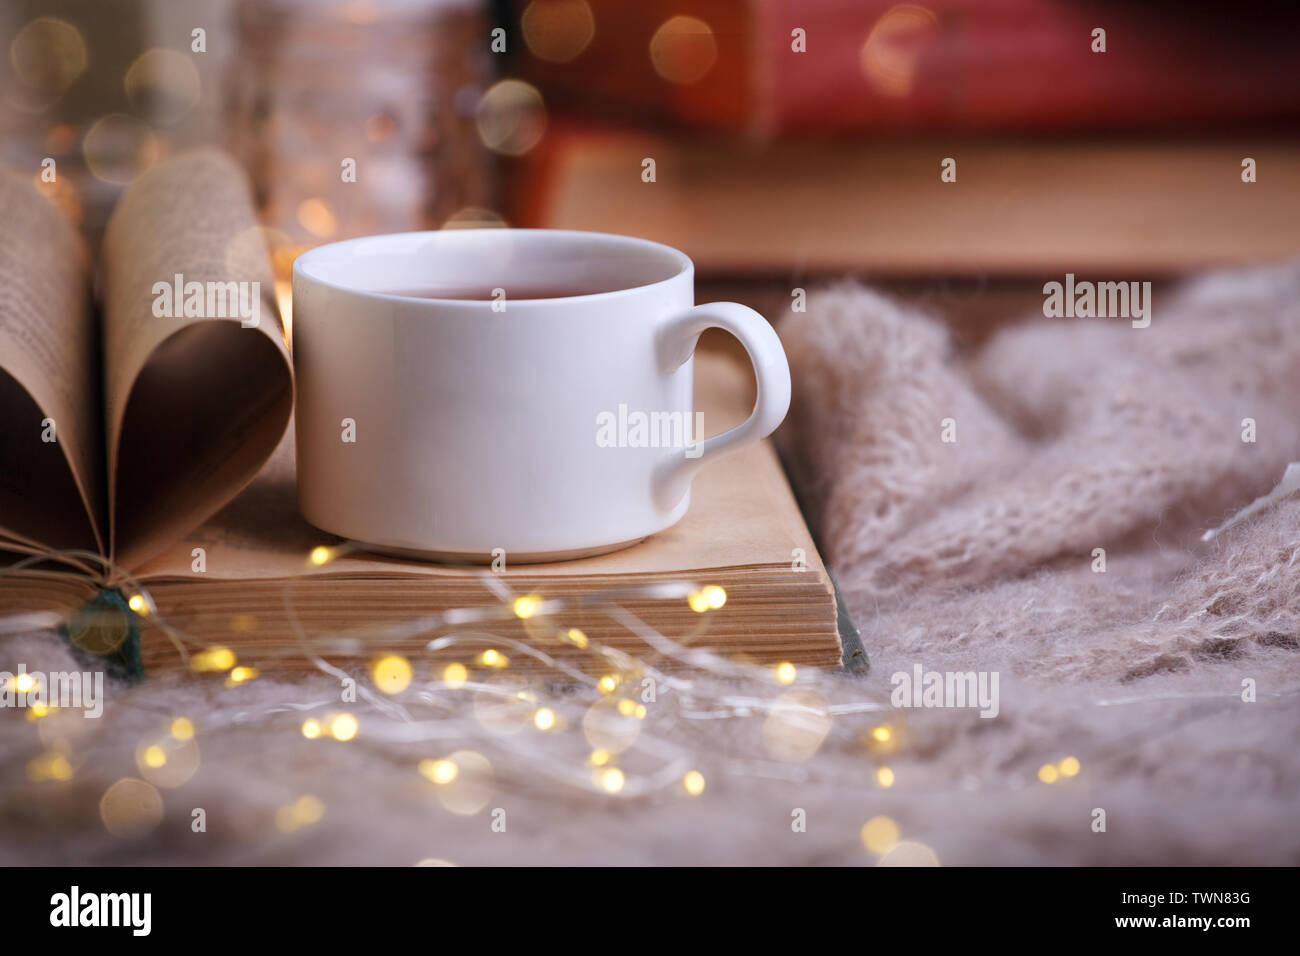 still life a cup of tea with an open book on a wooden table, the concept of cosiness and reading, Cozy autumn winter leisure time Stock Photo